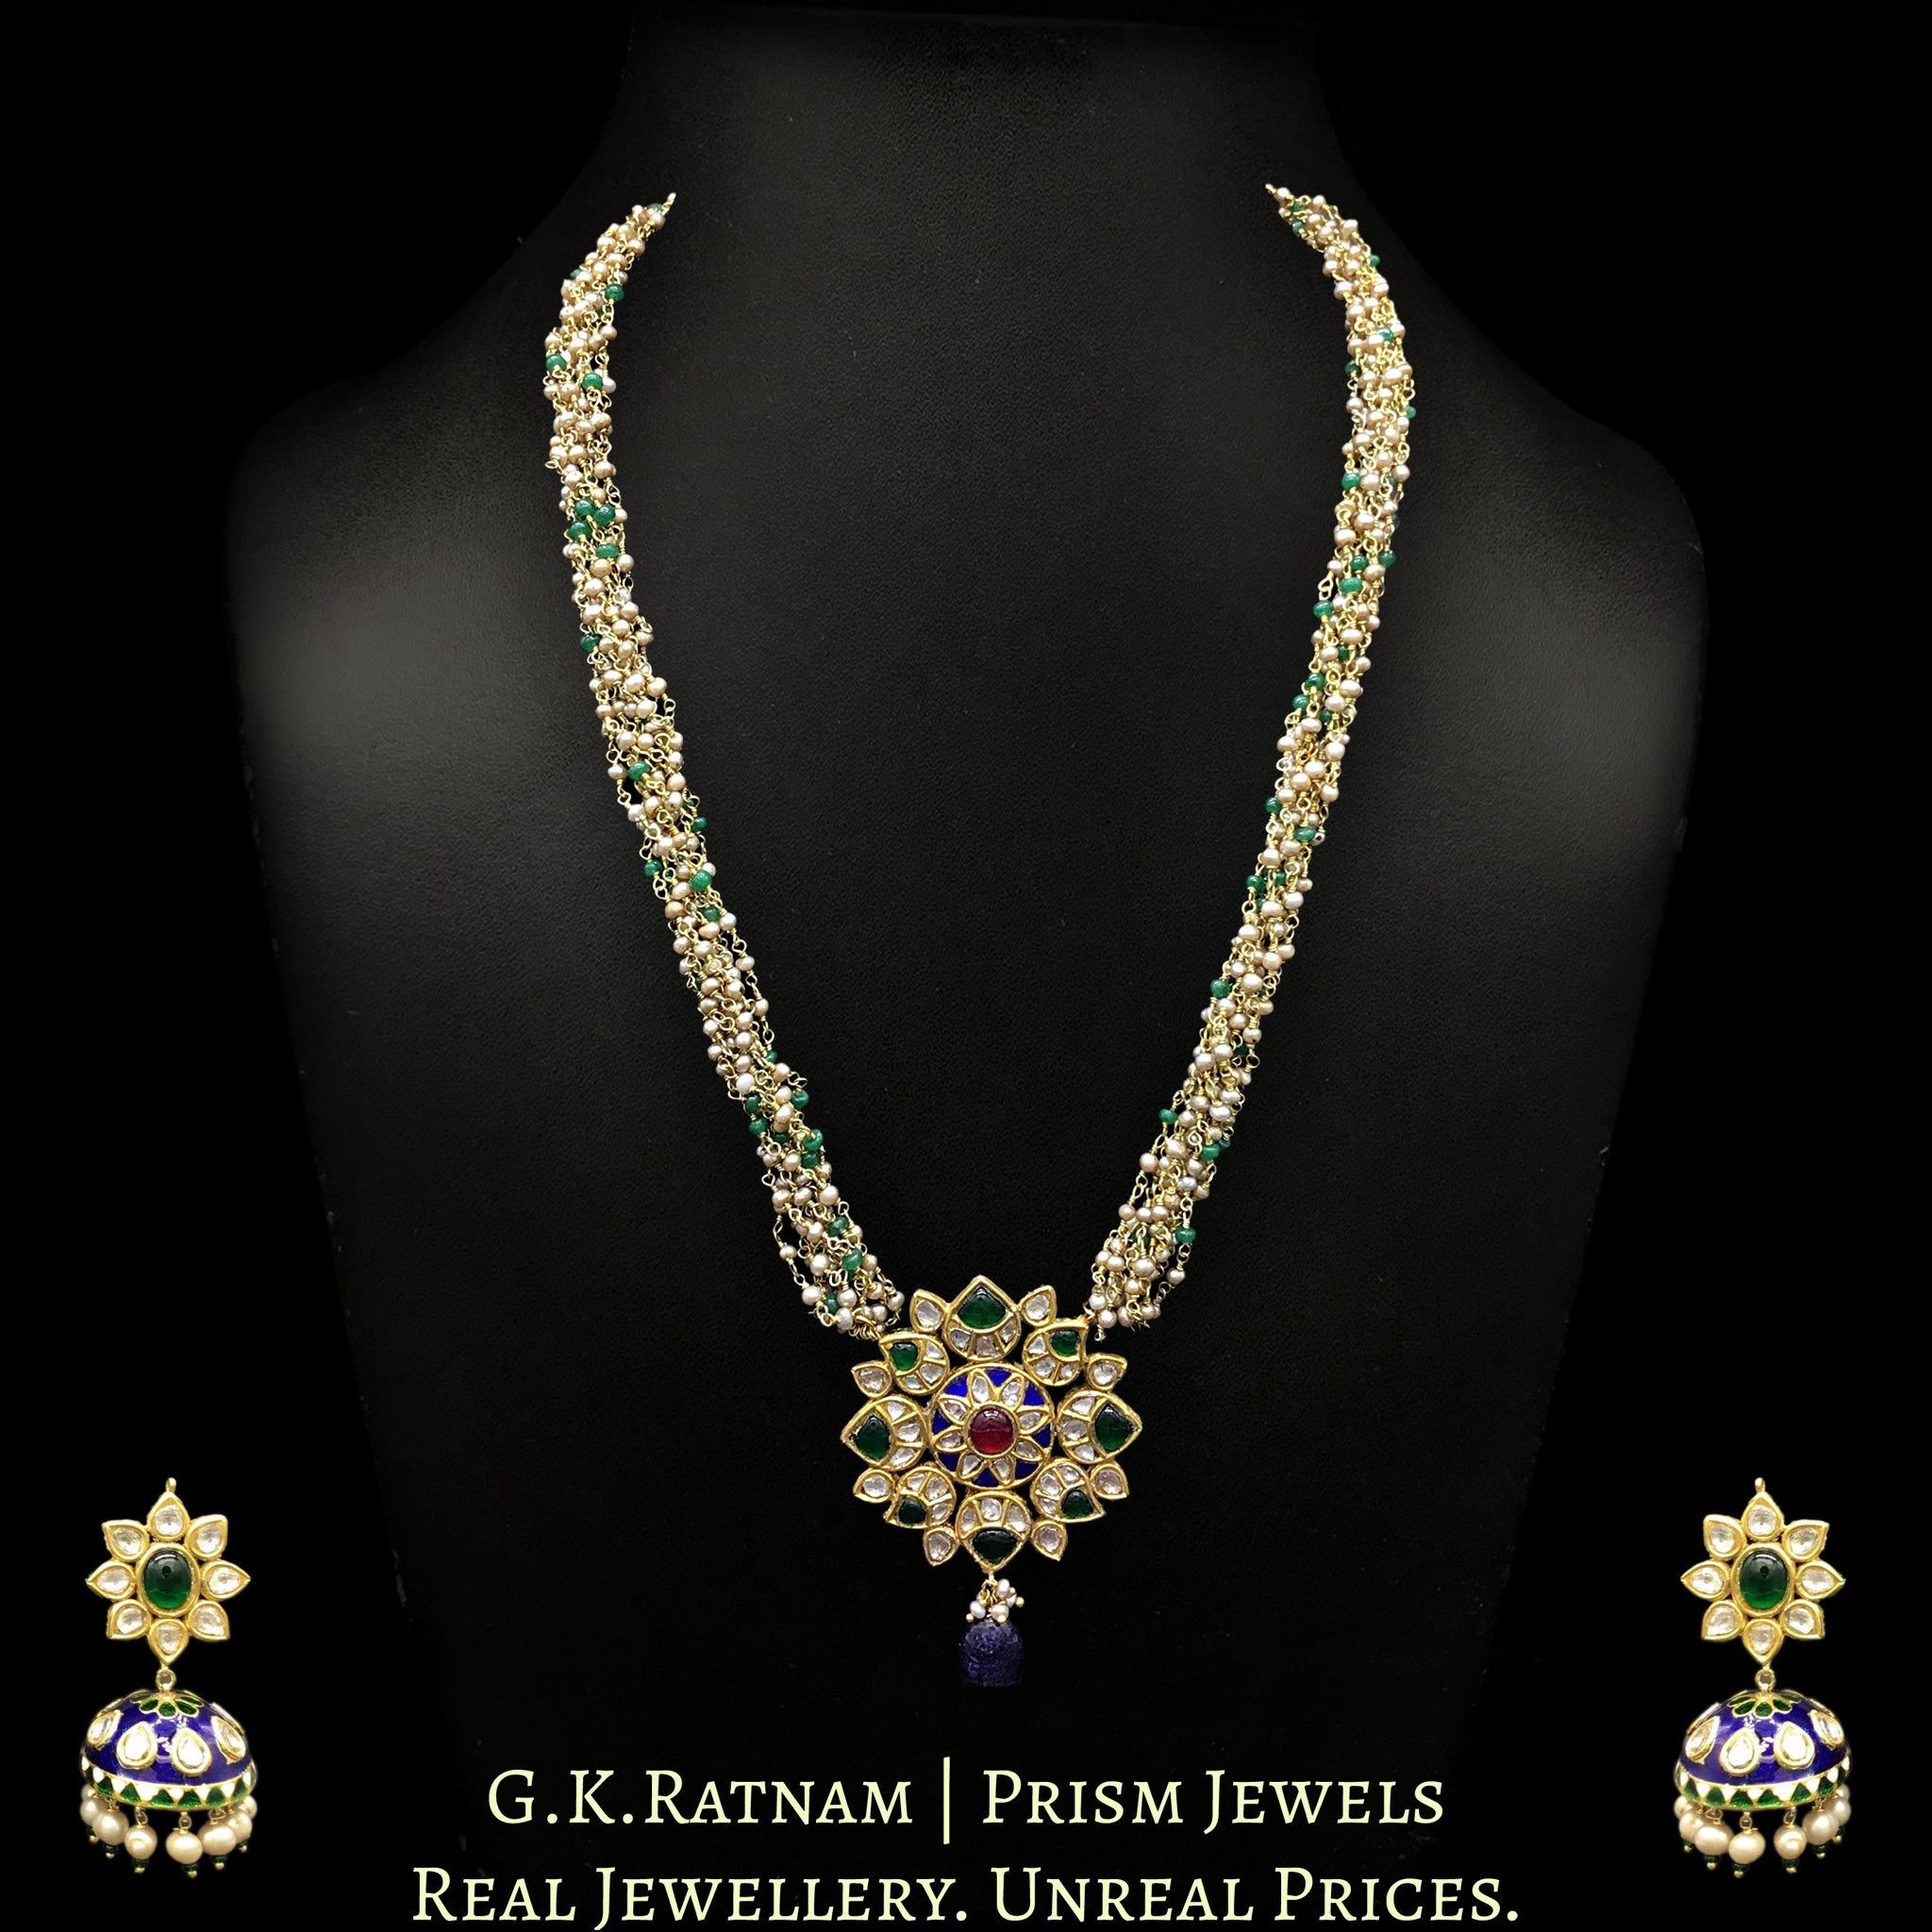 23k Gold and Diamond Polki star-shaped Pendant Set with antiqued hyderabadi pearl chains and a hint of green